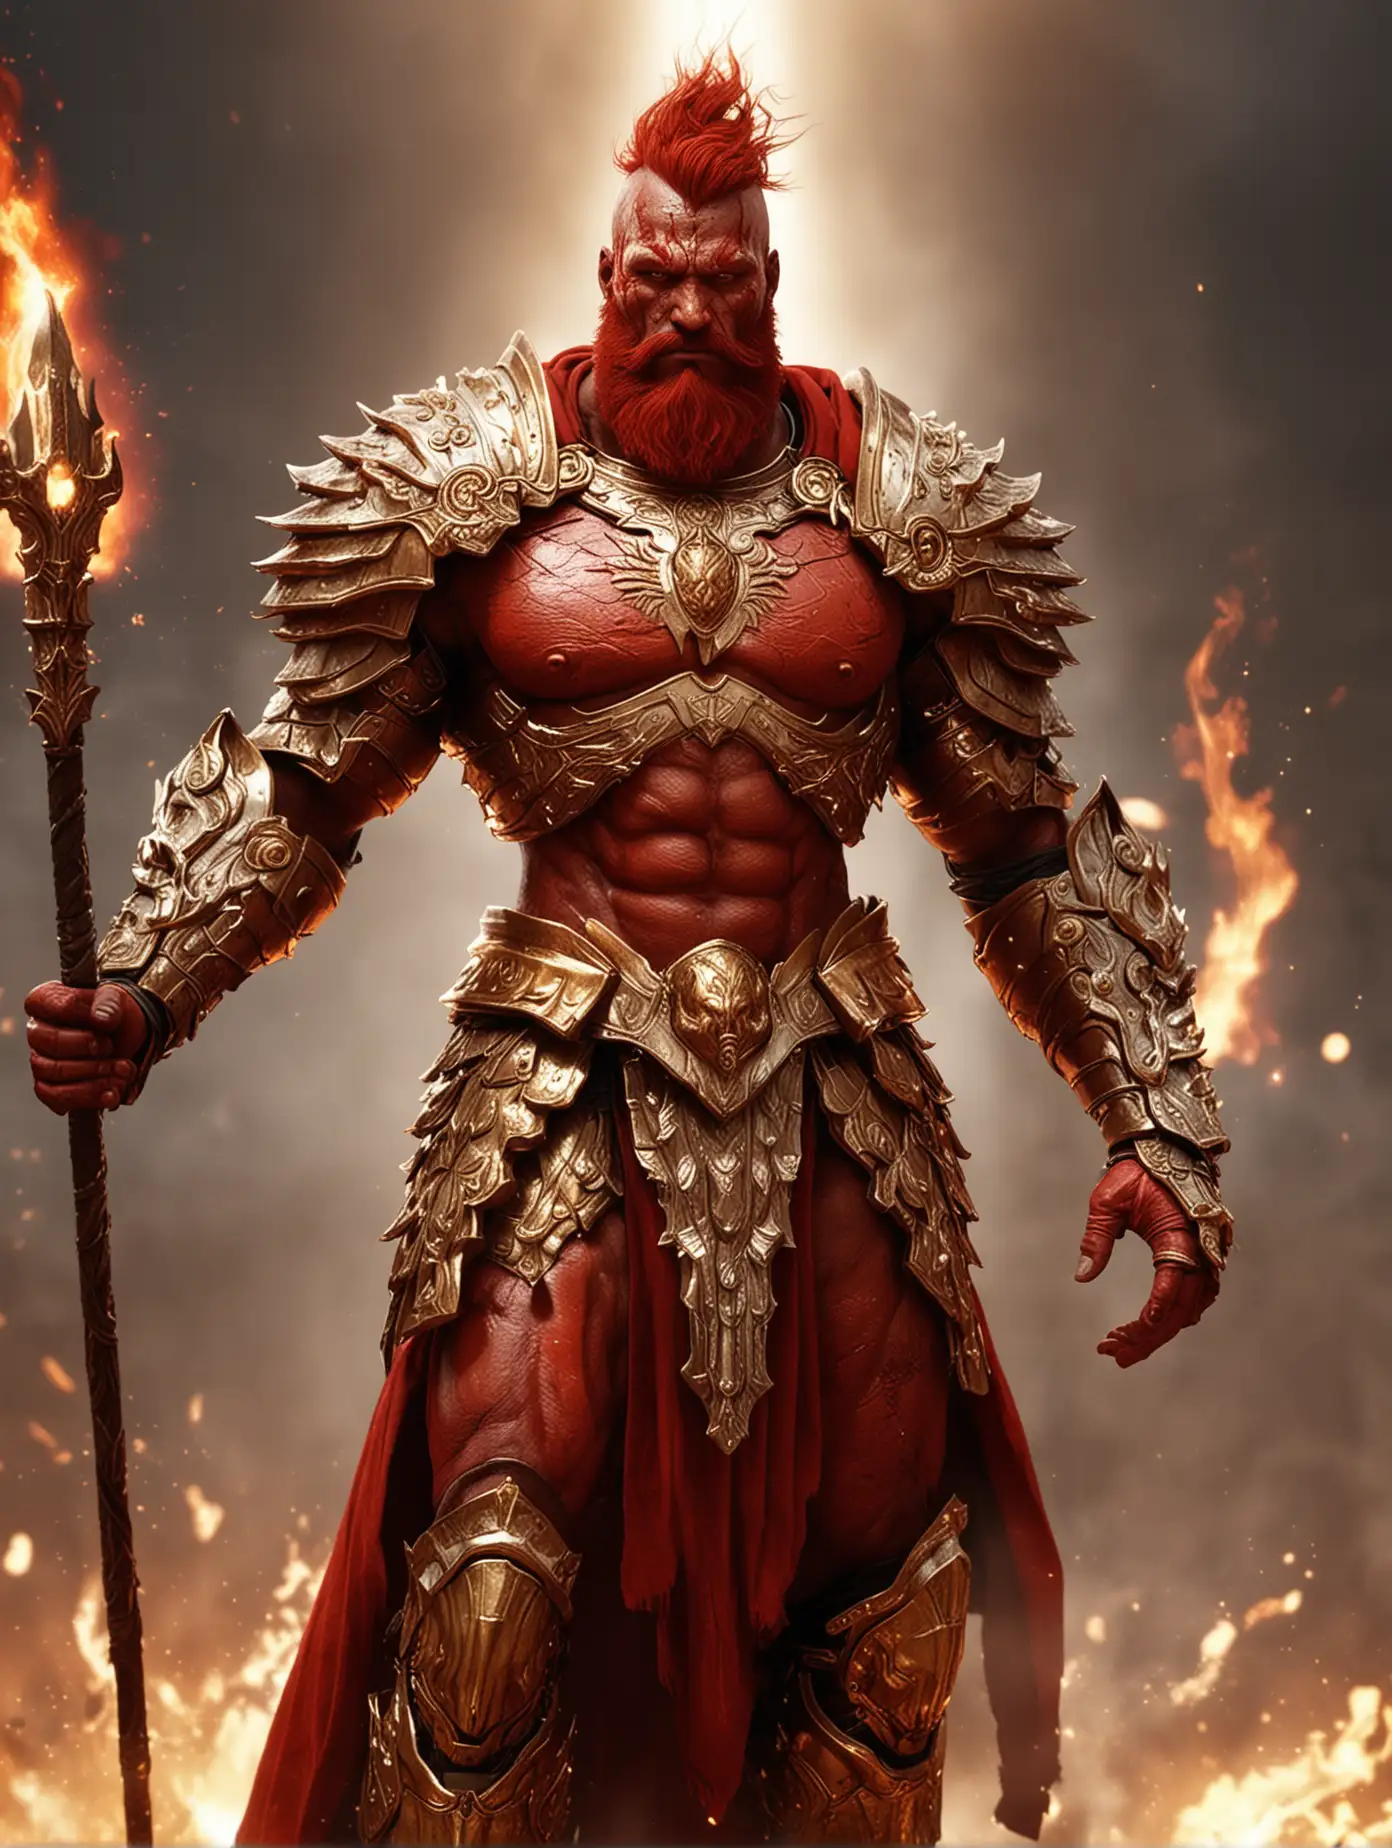 Character: Divine heritage war God. His skin is completely red, red all over. (red skin:1.39). Gold centurion armor. His hair and beard are white.

background: celestial flame